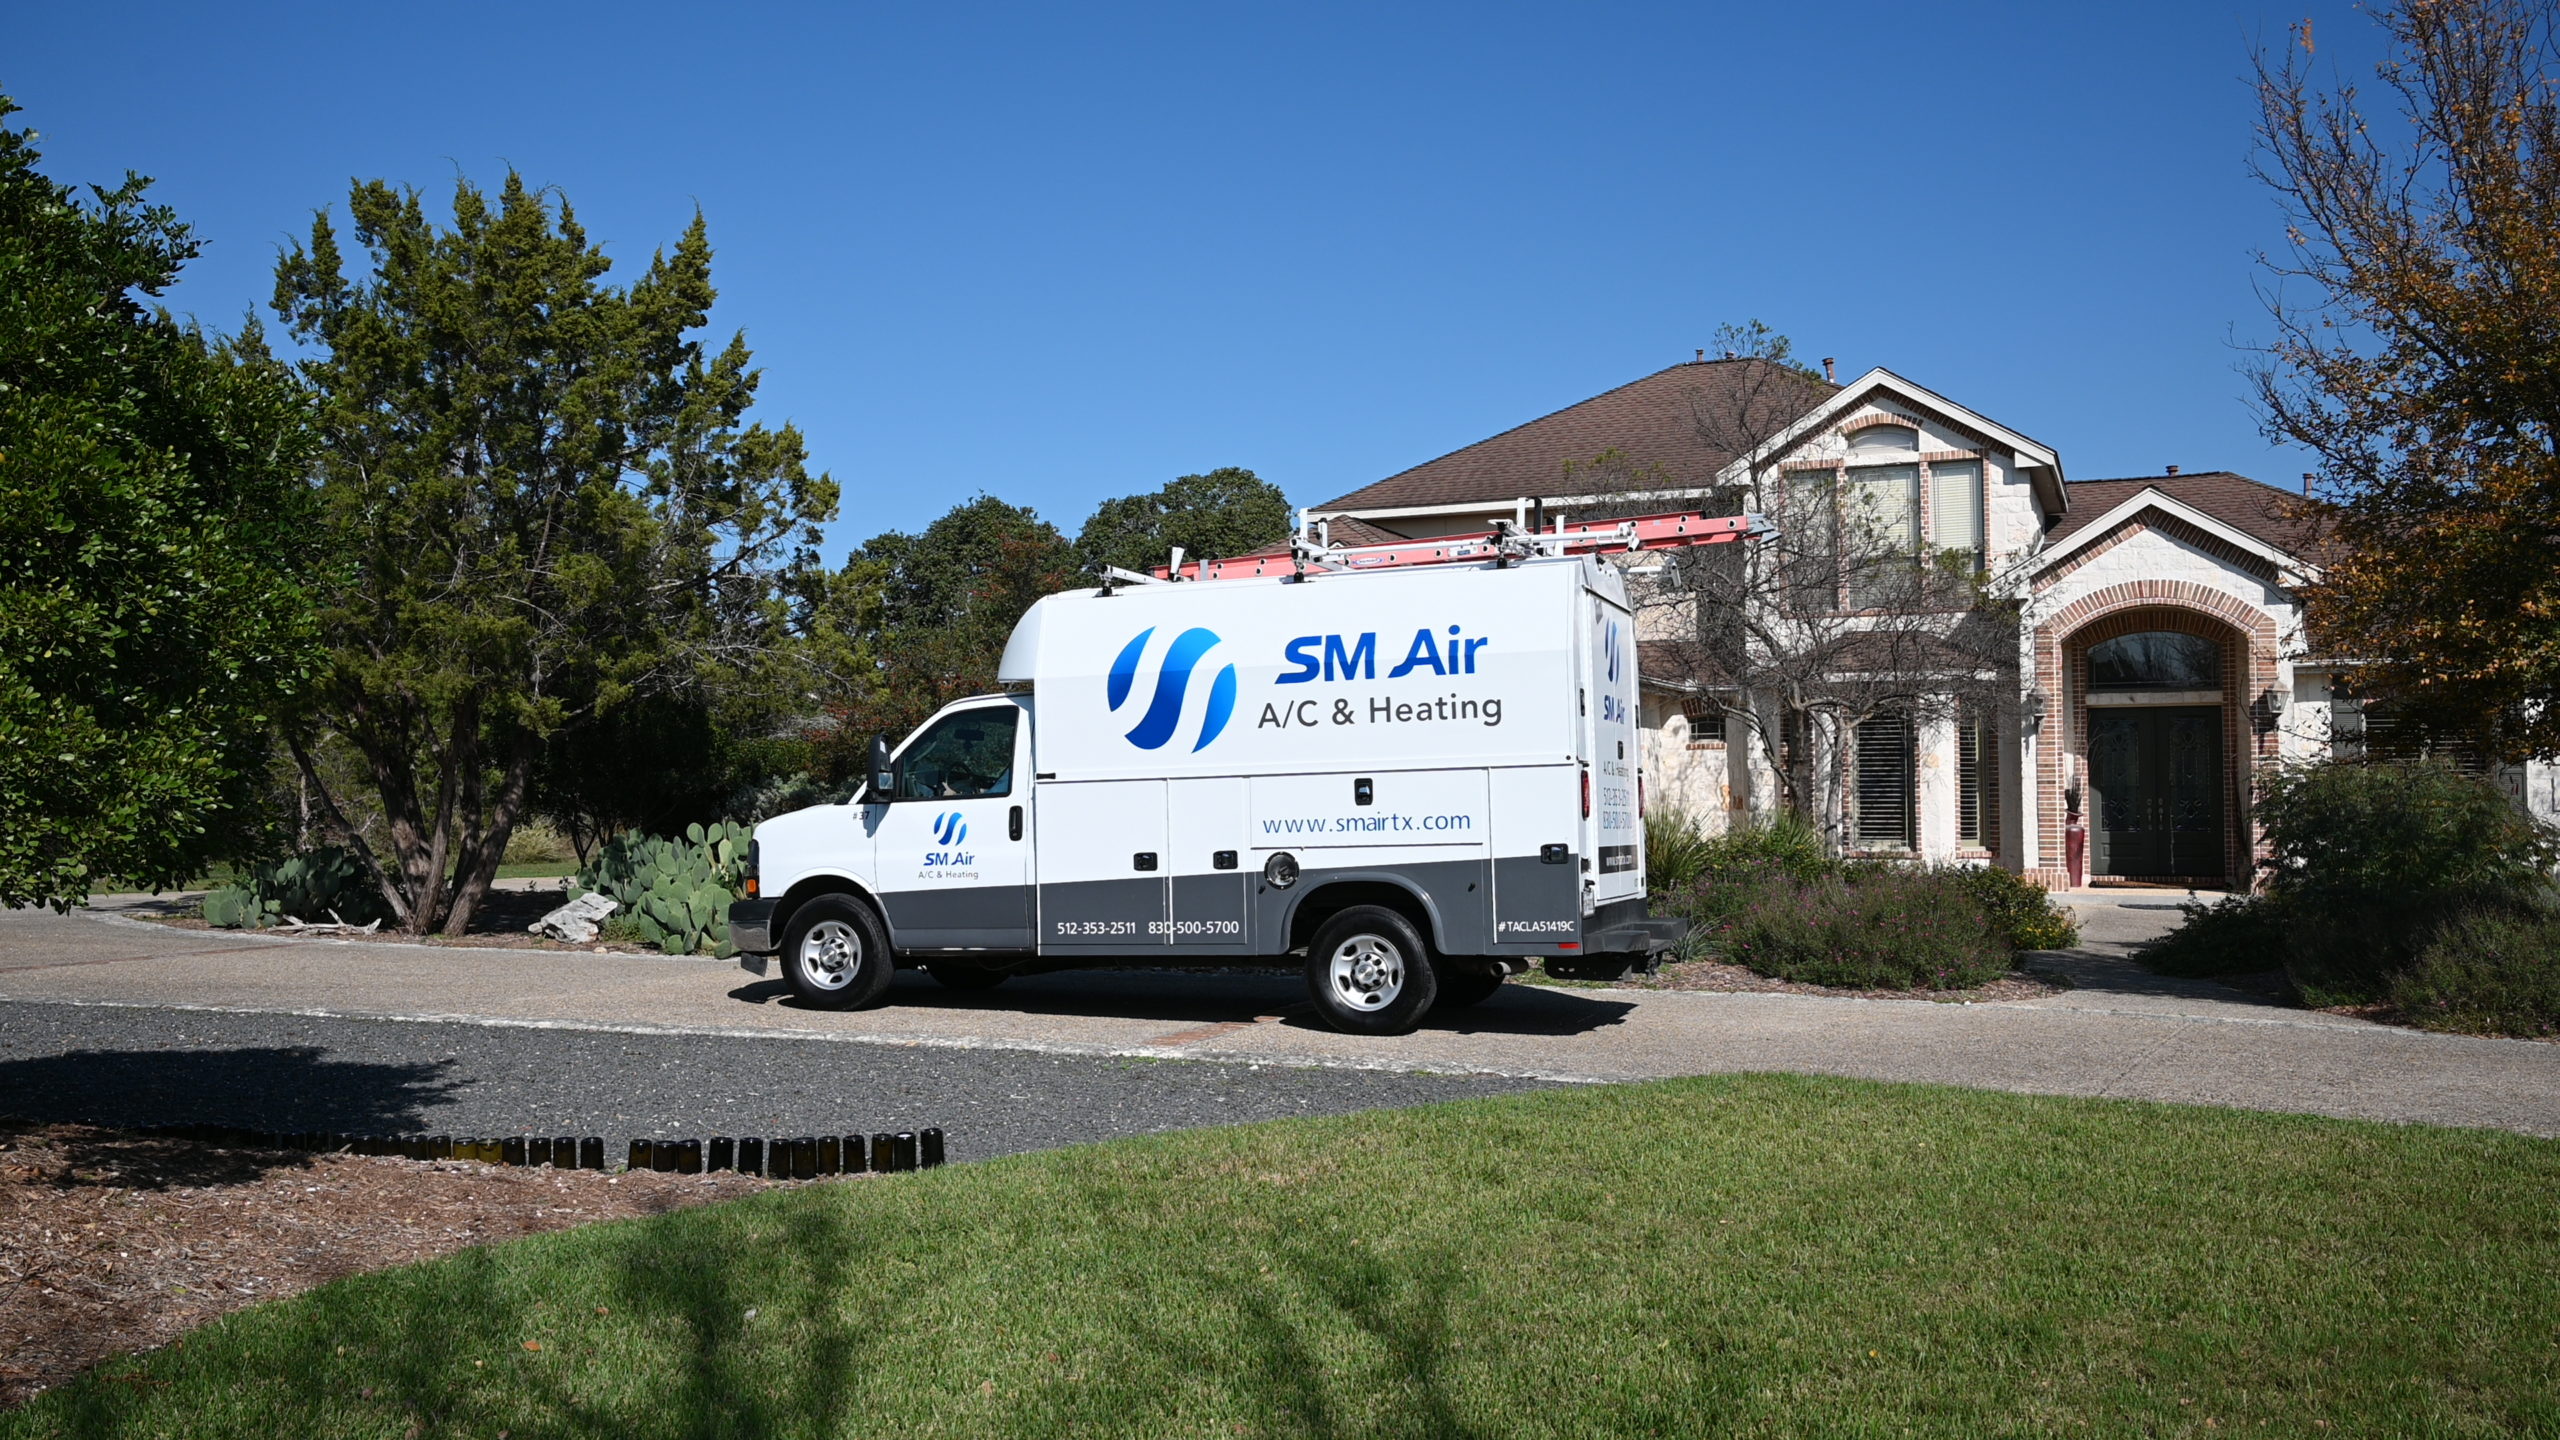 SM Air truck infront of a house.				
